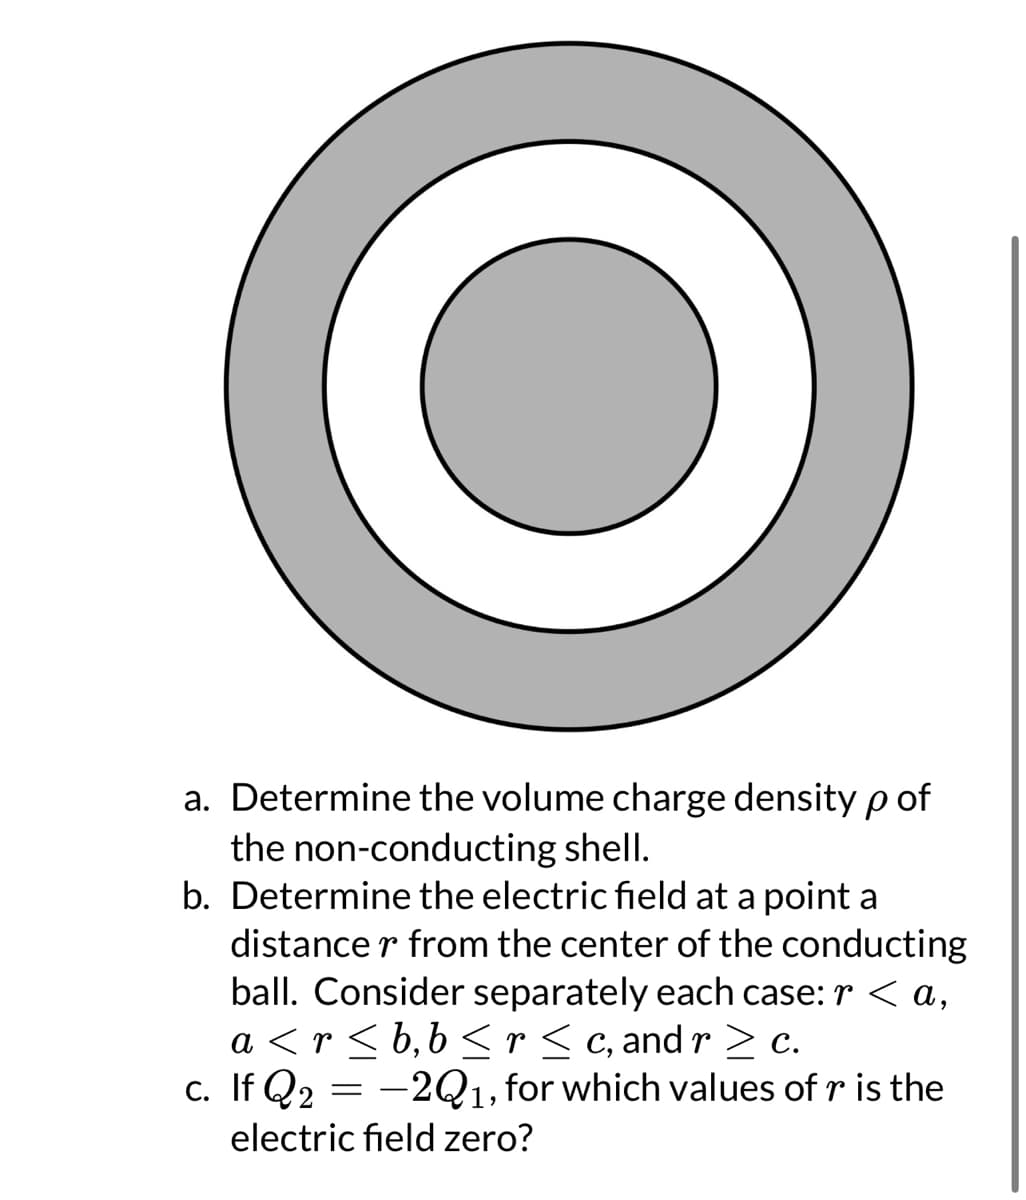 O
a. Determine the volume charge density p of
the non-conducting shell.
b. Determine the electric field at a point a
distance from the center of the conducting
ball. Consider separately each case: r < a,
a<r<b,b ≤ r ≤c, and r>c.
c. If Q₂ = -2Q1, for which values of r is the
Q2
electric field zero?